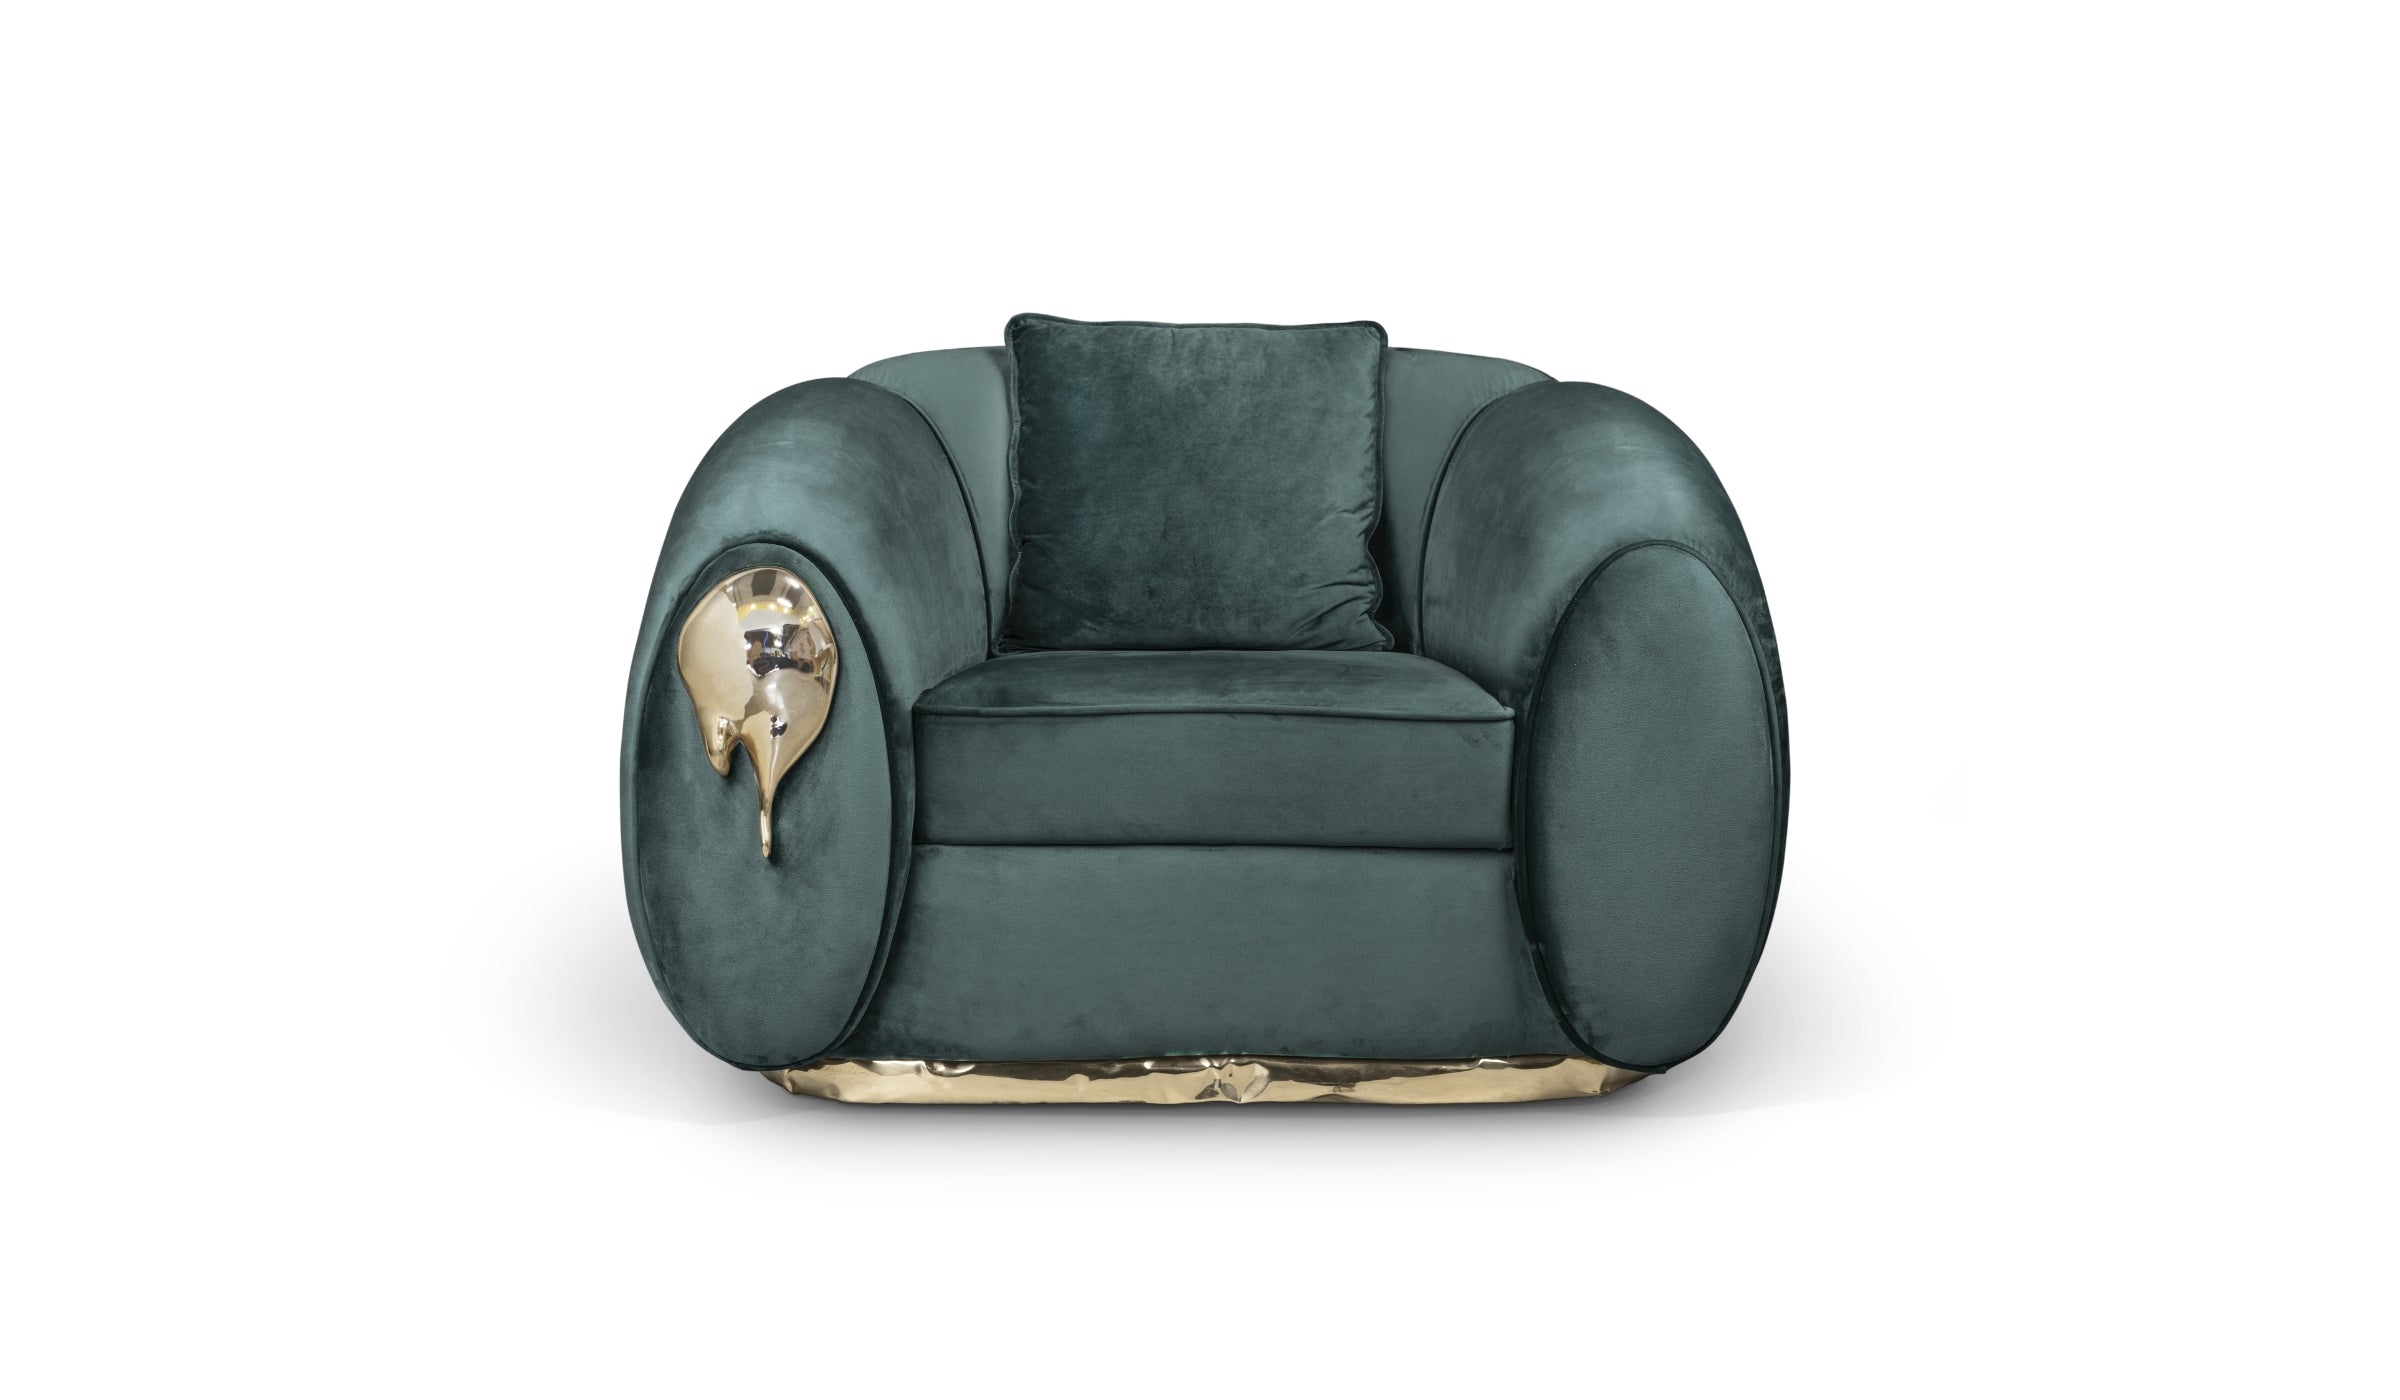 Soleil - Contemporary vintage armchair with brass details and high-end green fabric